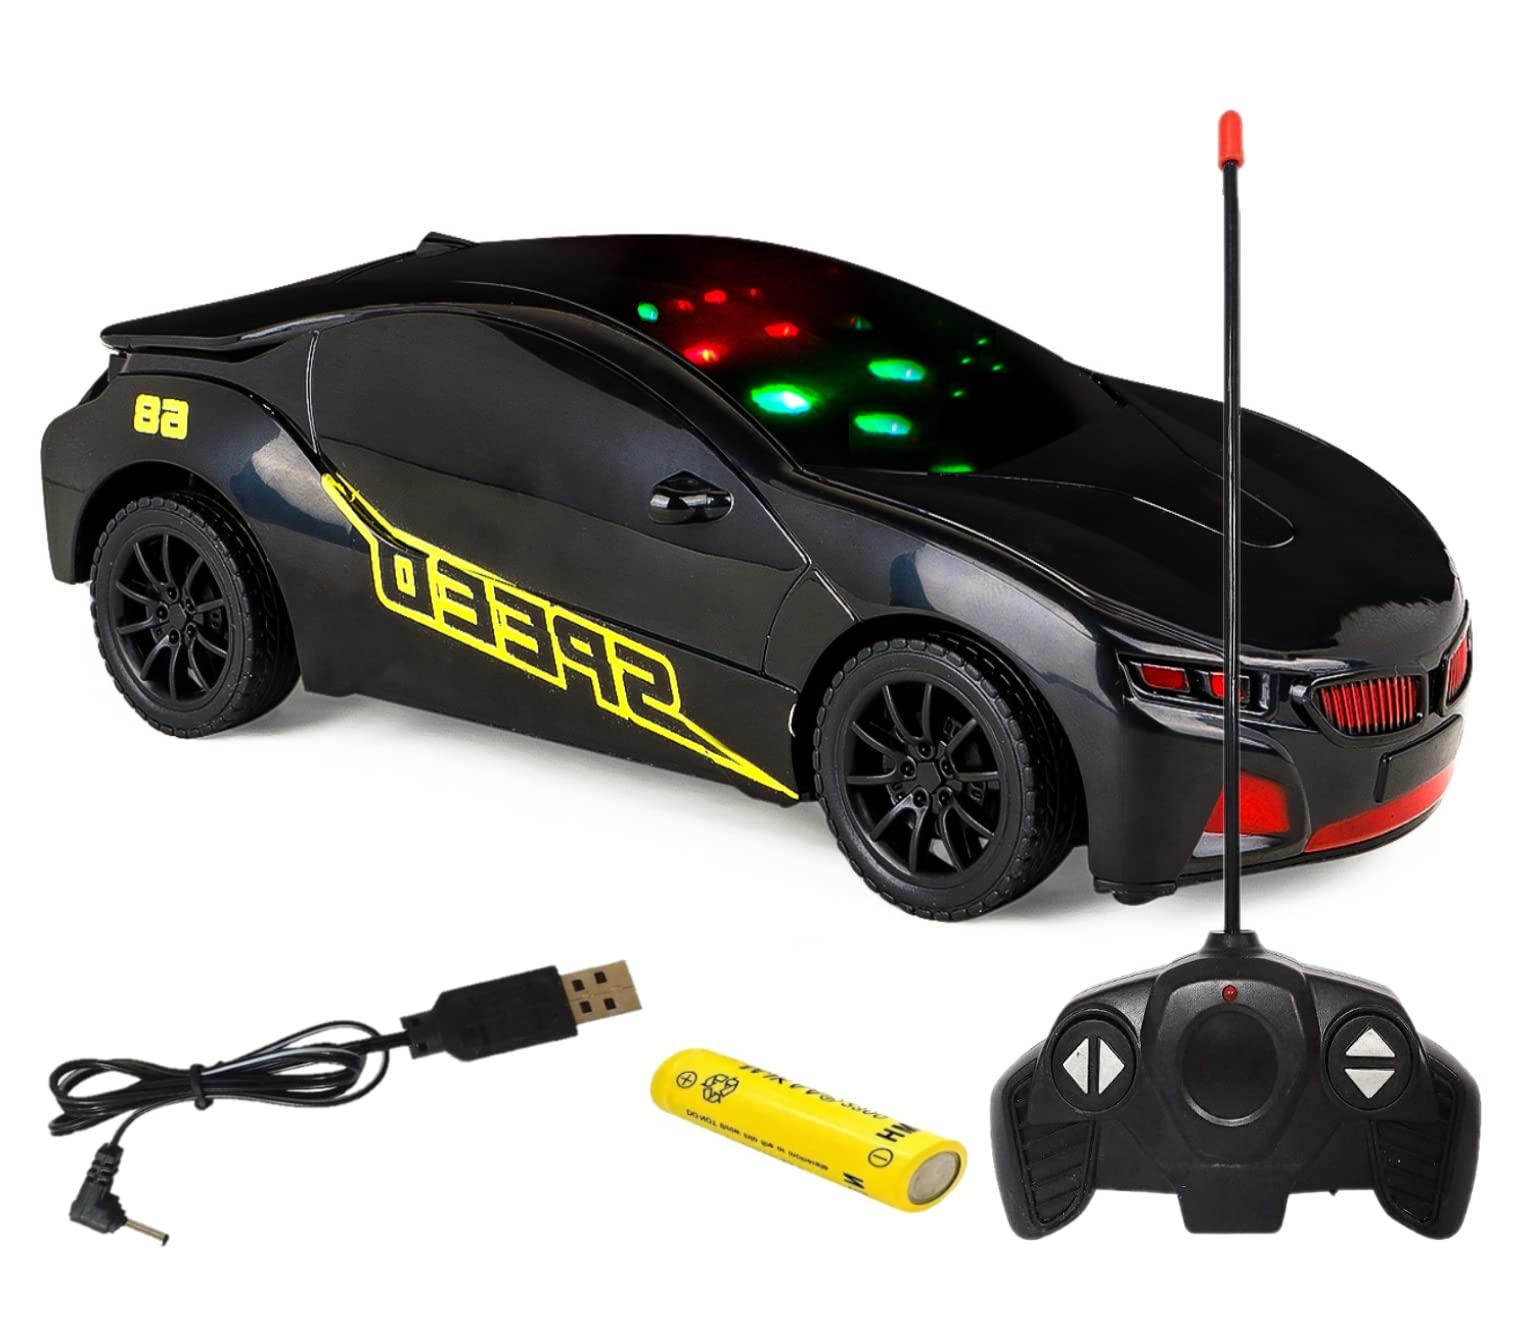 Remote Control Car With Lights: Getting Started with Your Remote Control Car with Lights